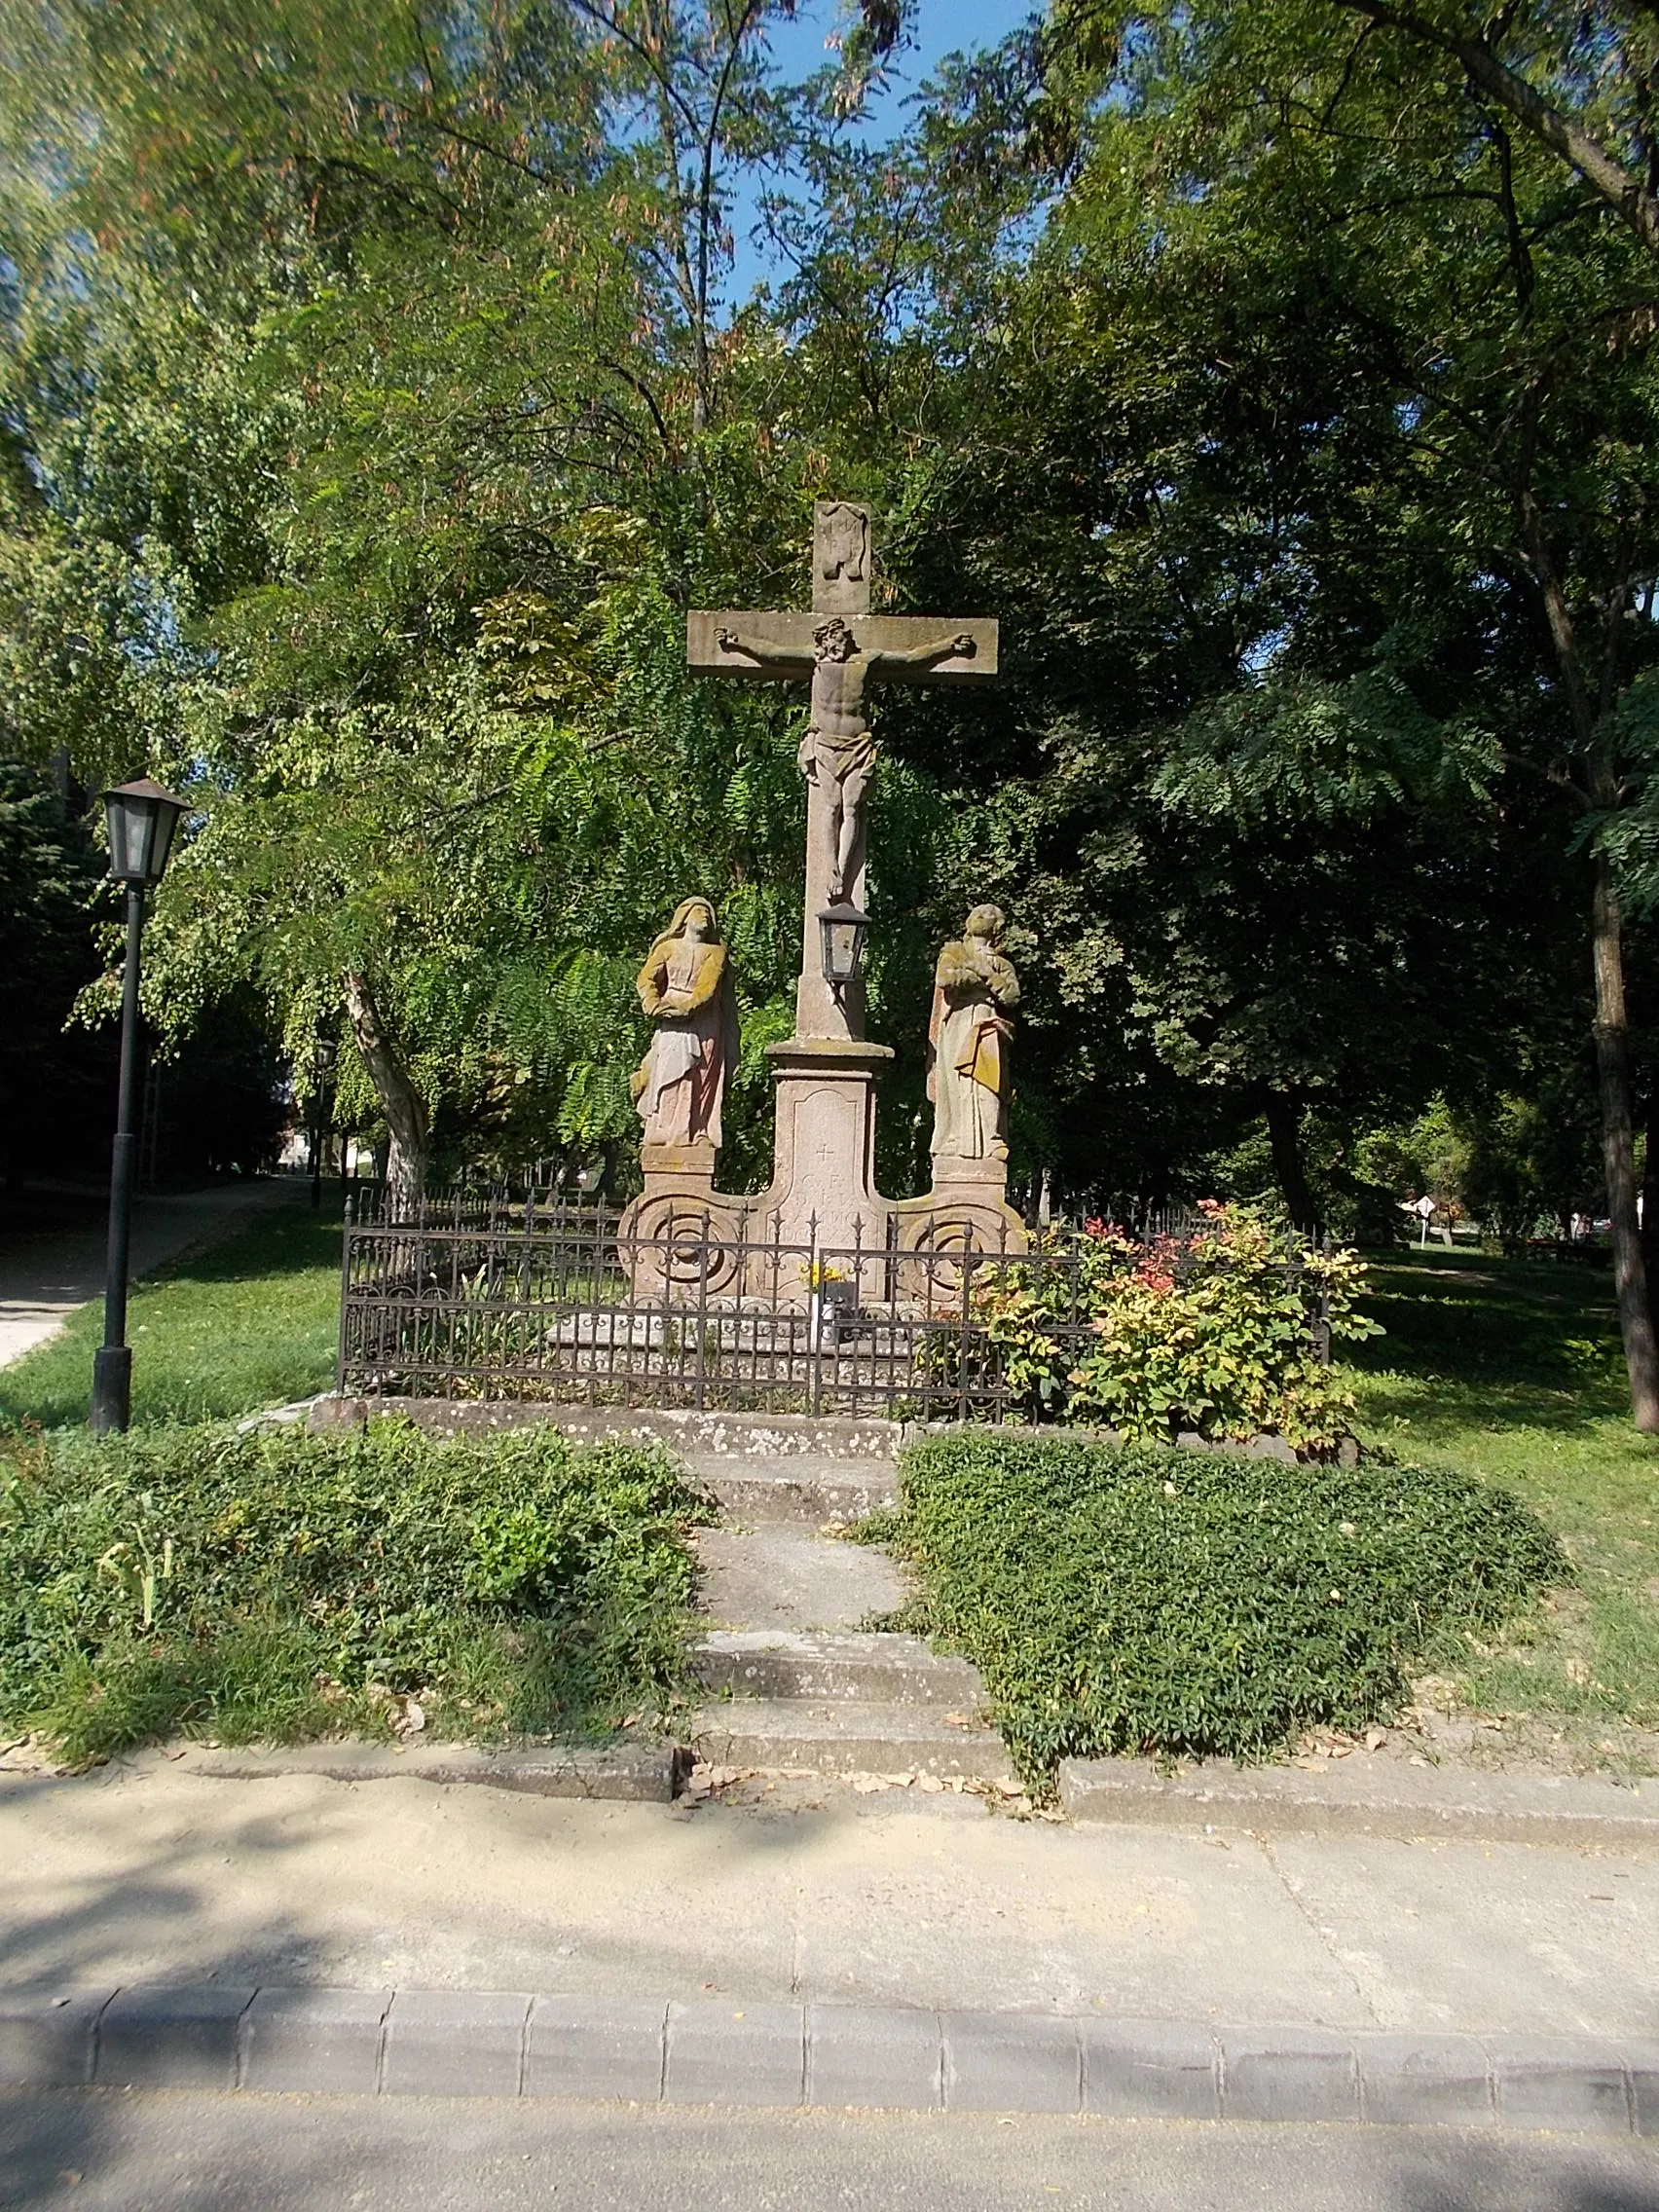 Photo showing: Calvary. Listed ID 5919. Cross with corpus. statues of St. John the Evangelist and Virgin Mary.  Listed twice bcoz Ferencesek Square area listed  ID -9464. (1776) work. Baroque, limestone. - Ferencesek Square, Jászberény, Jász-Nagykun-Szolnok County, Hungary

This is a photo of a monument in Hungary. Identifier: 5919

This is a photo of a monument in Hungary. Identifier: -9464